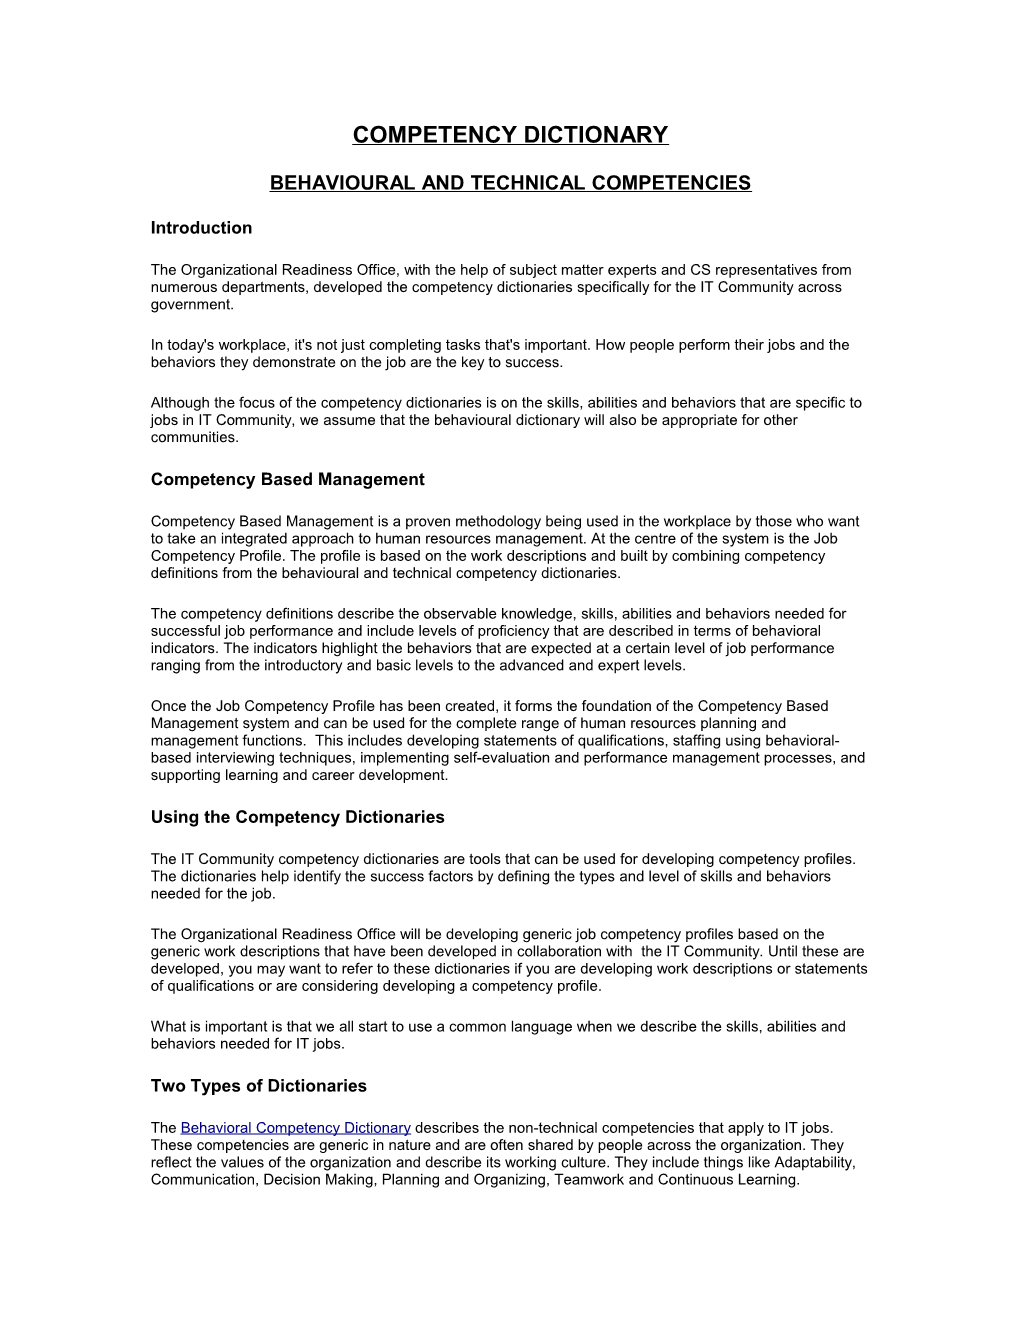 Behavioural and Technical Competencies